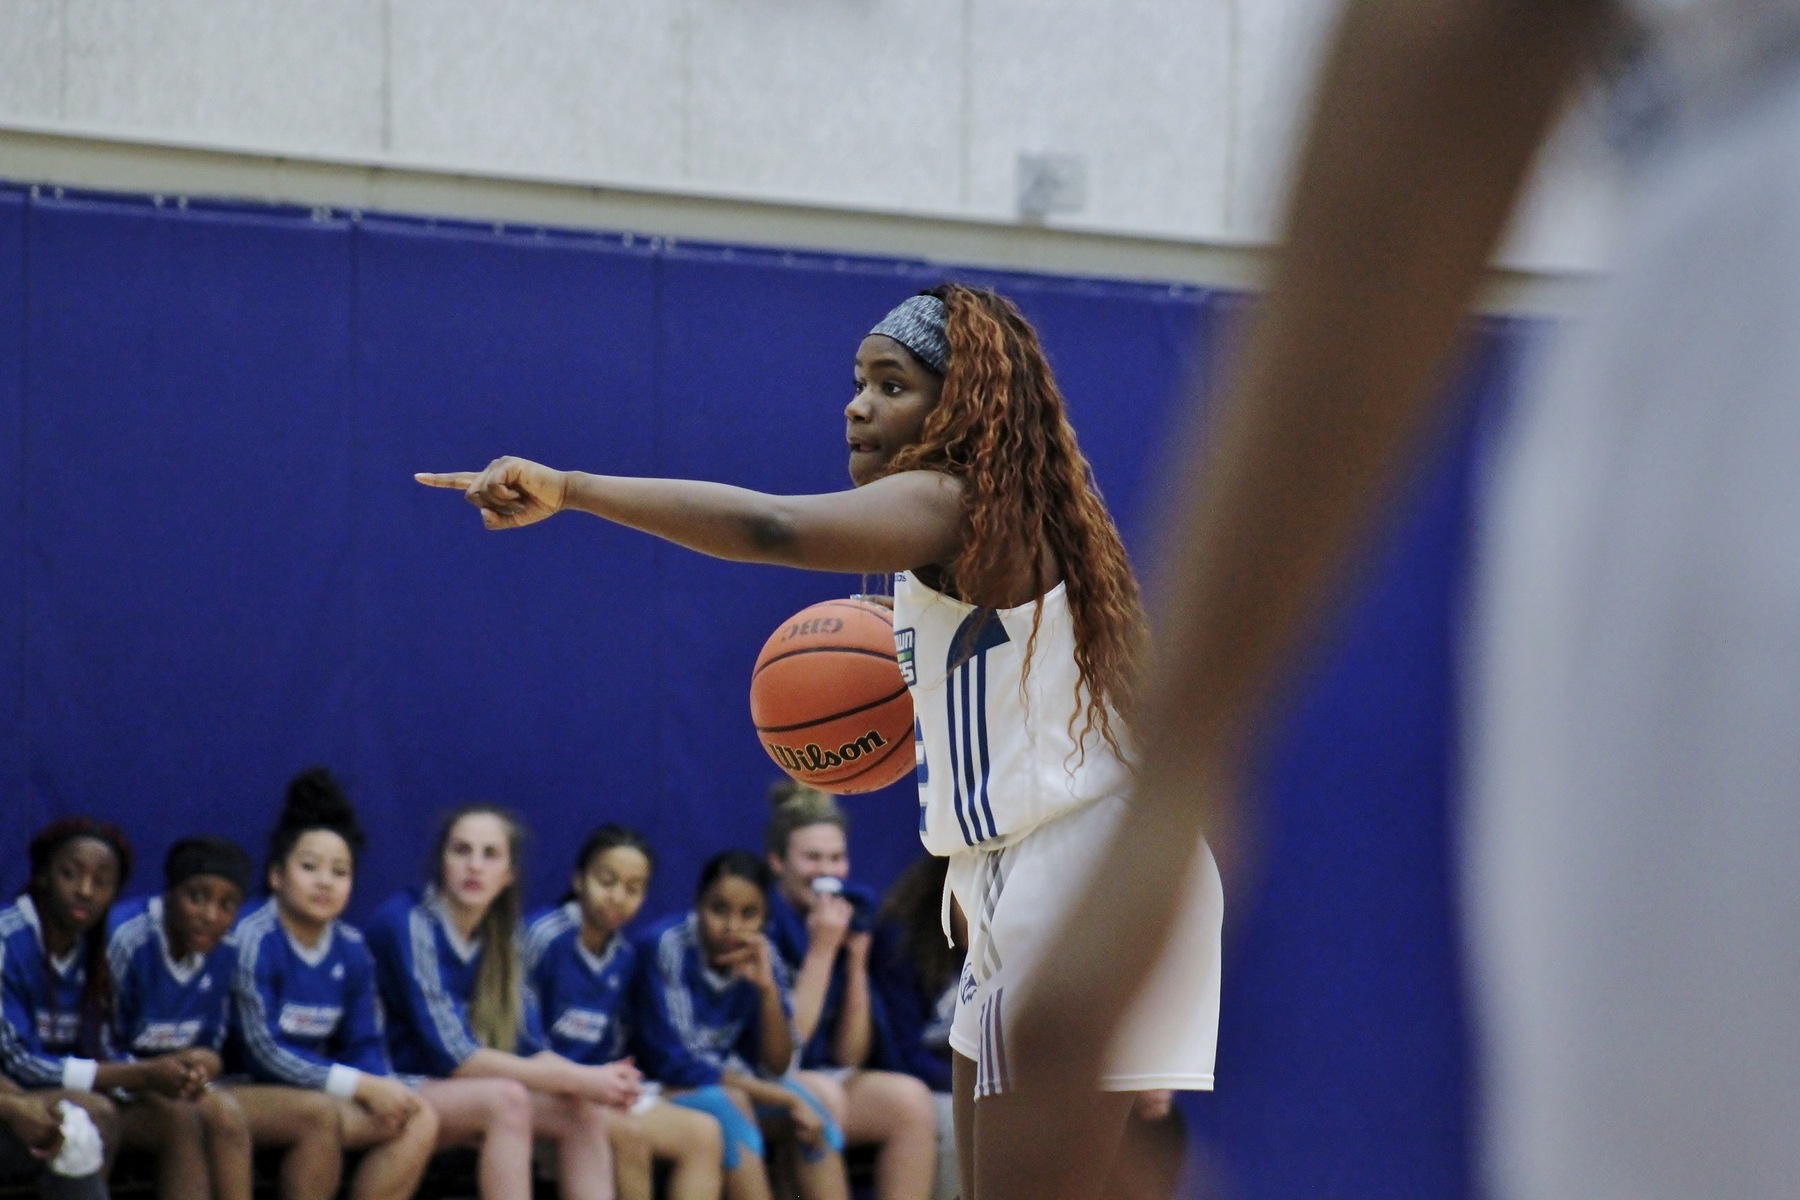 Female basketball player dribbling and pointing